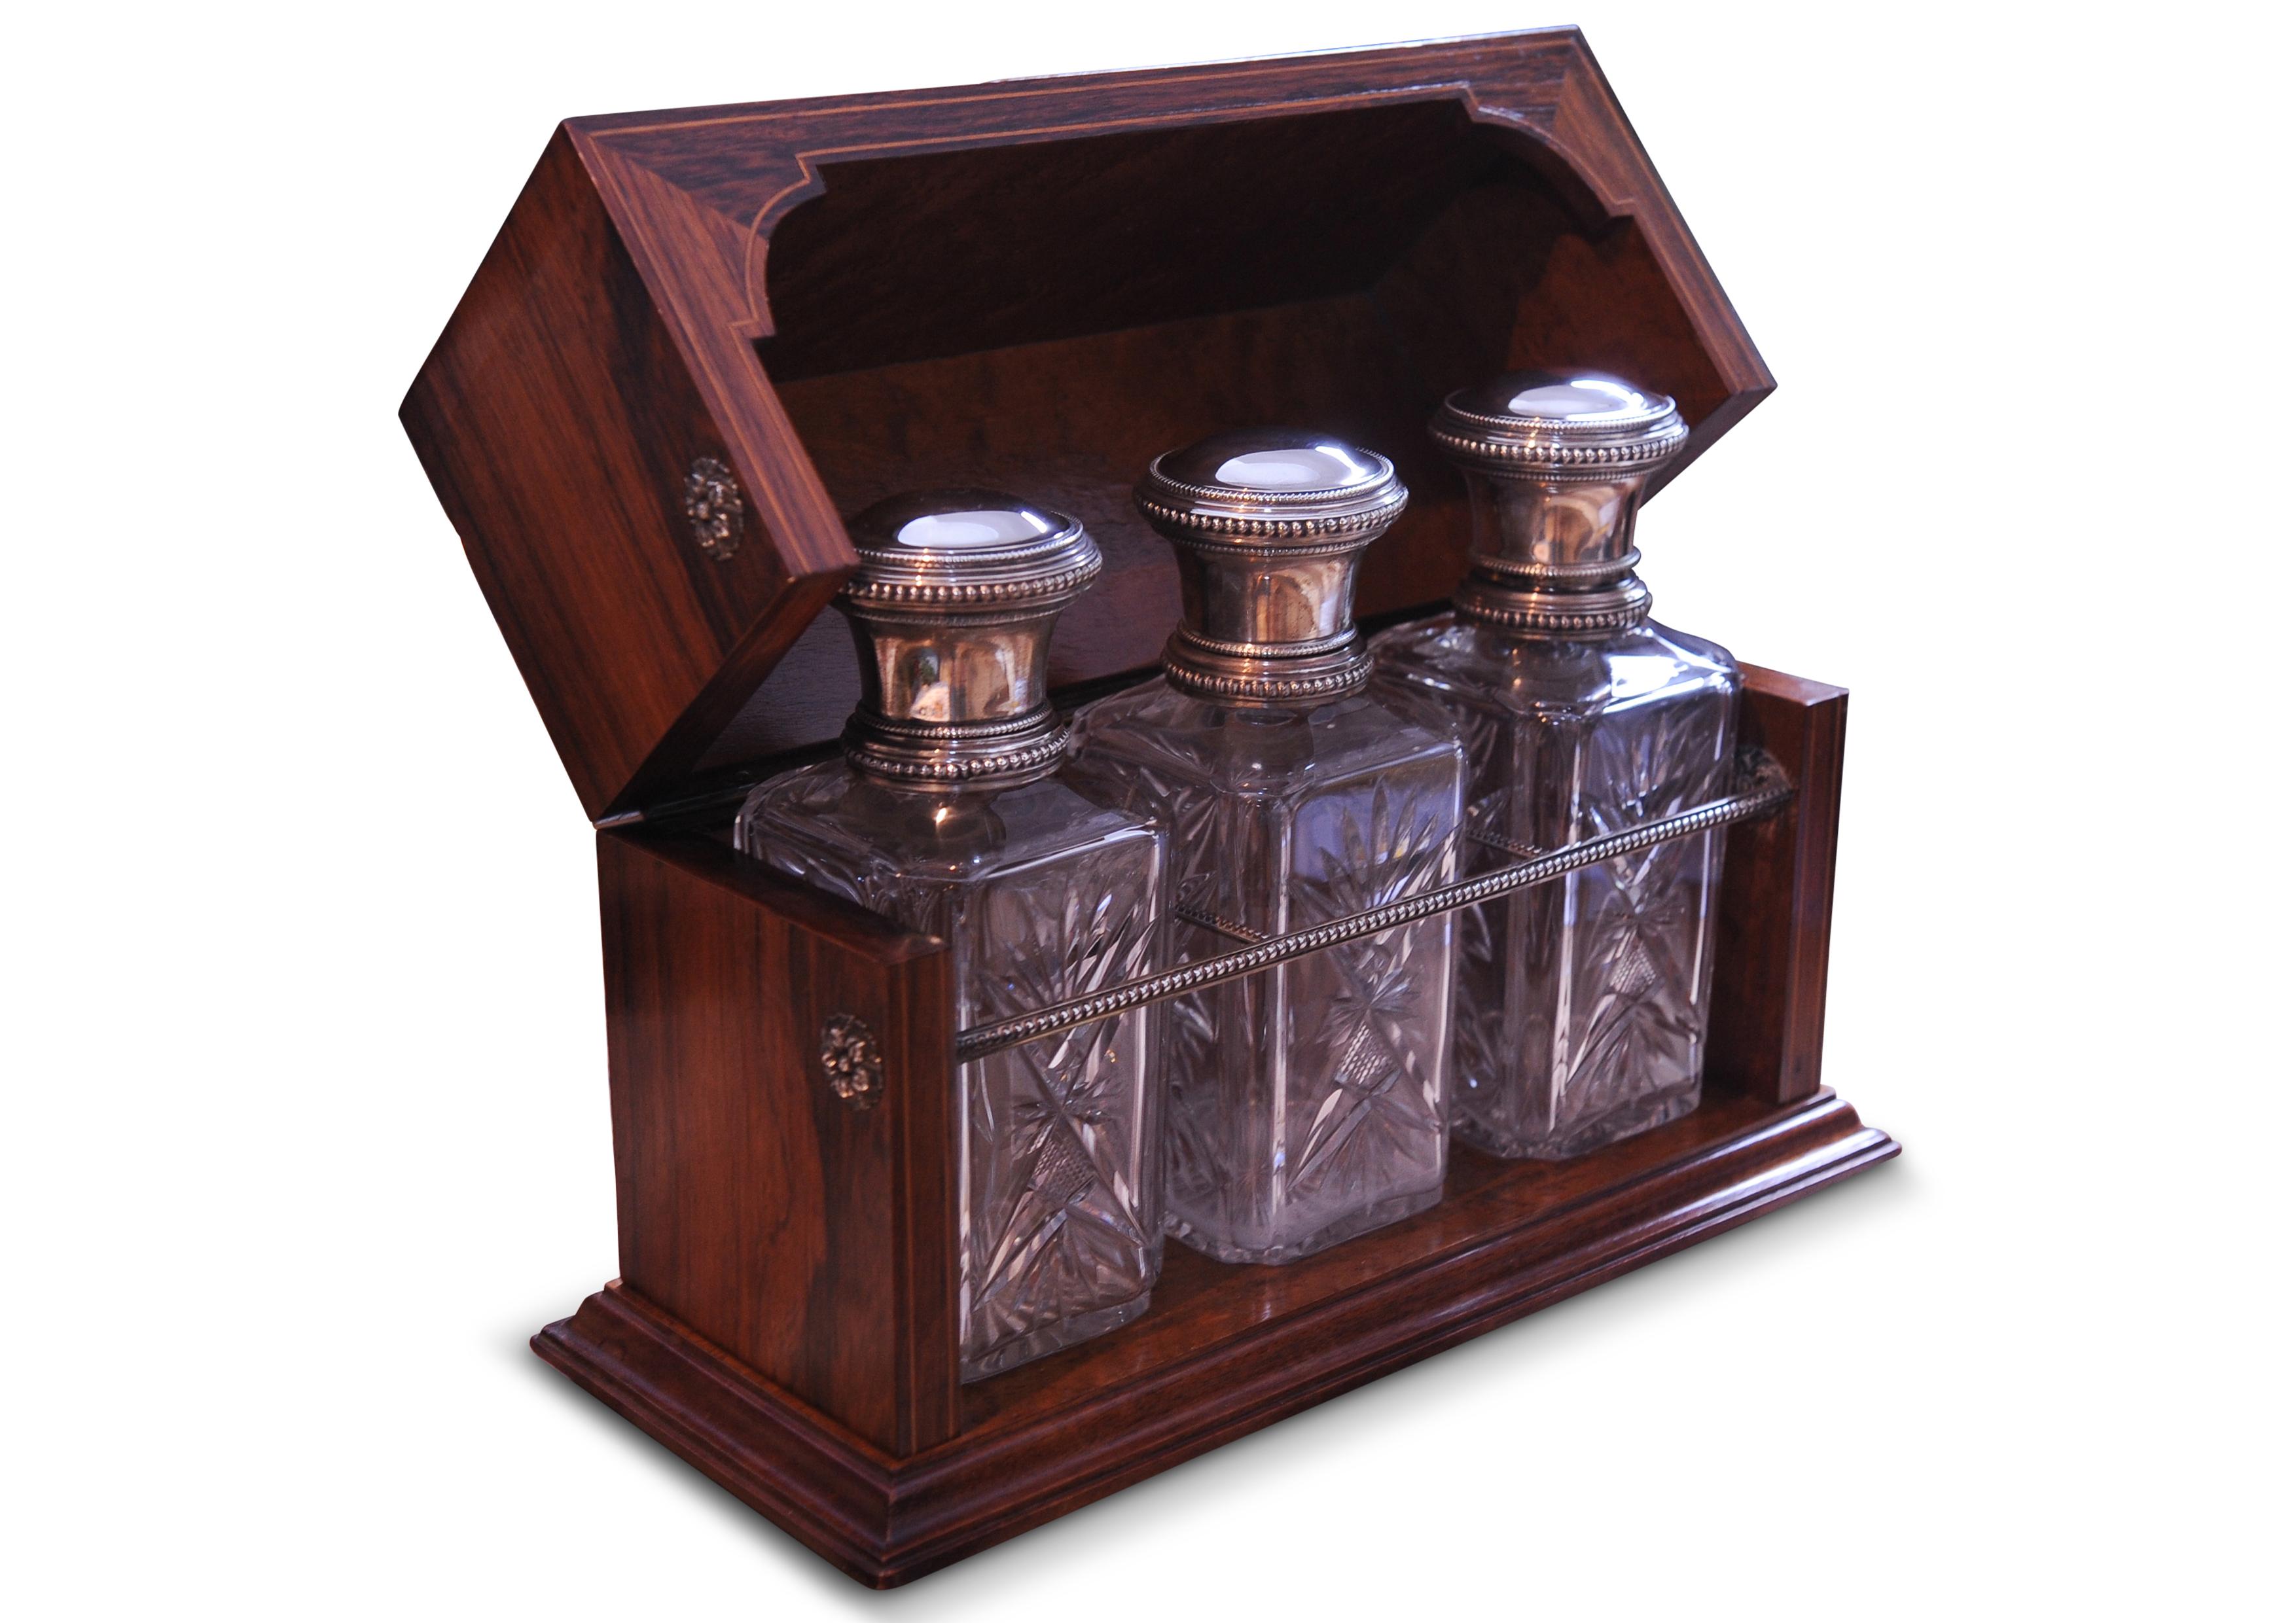 French 19th Century Silver Cut Glass Decanters Housed in a Rosewood & Amboyna Tantalus